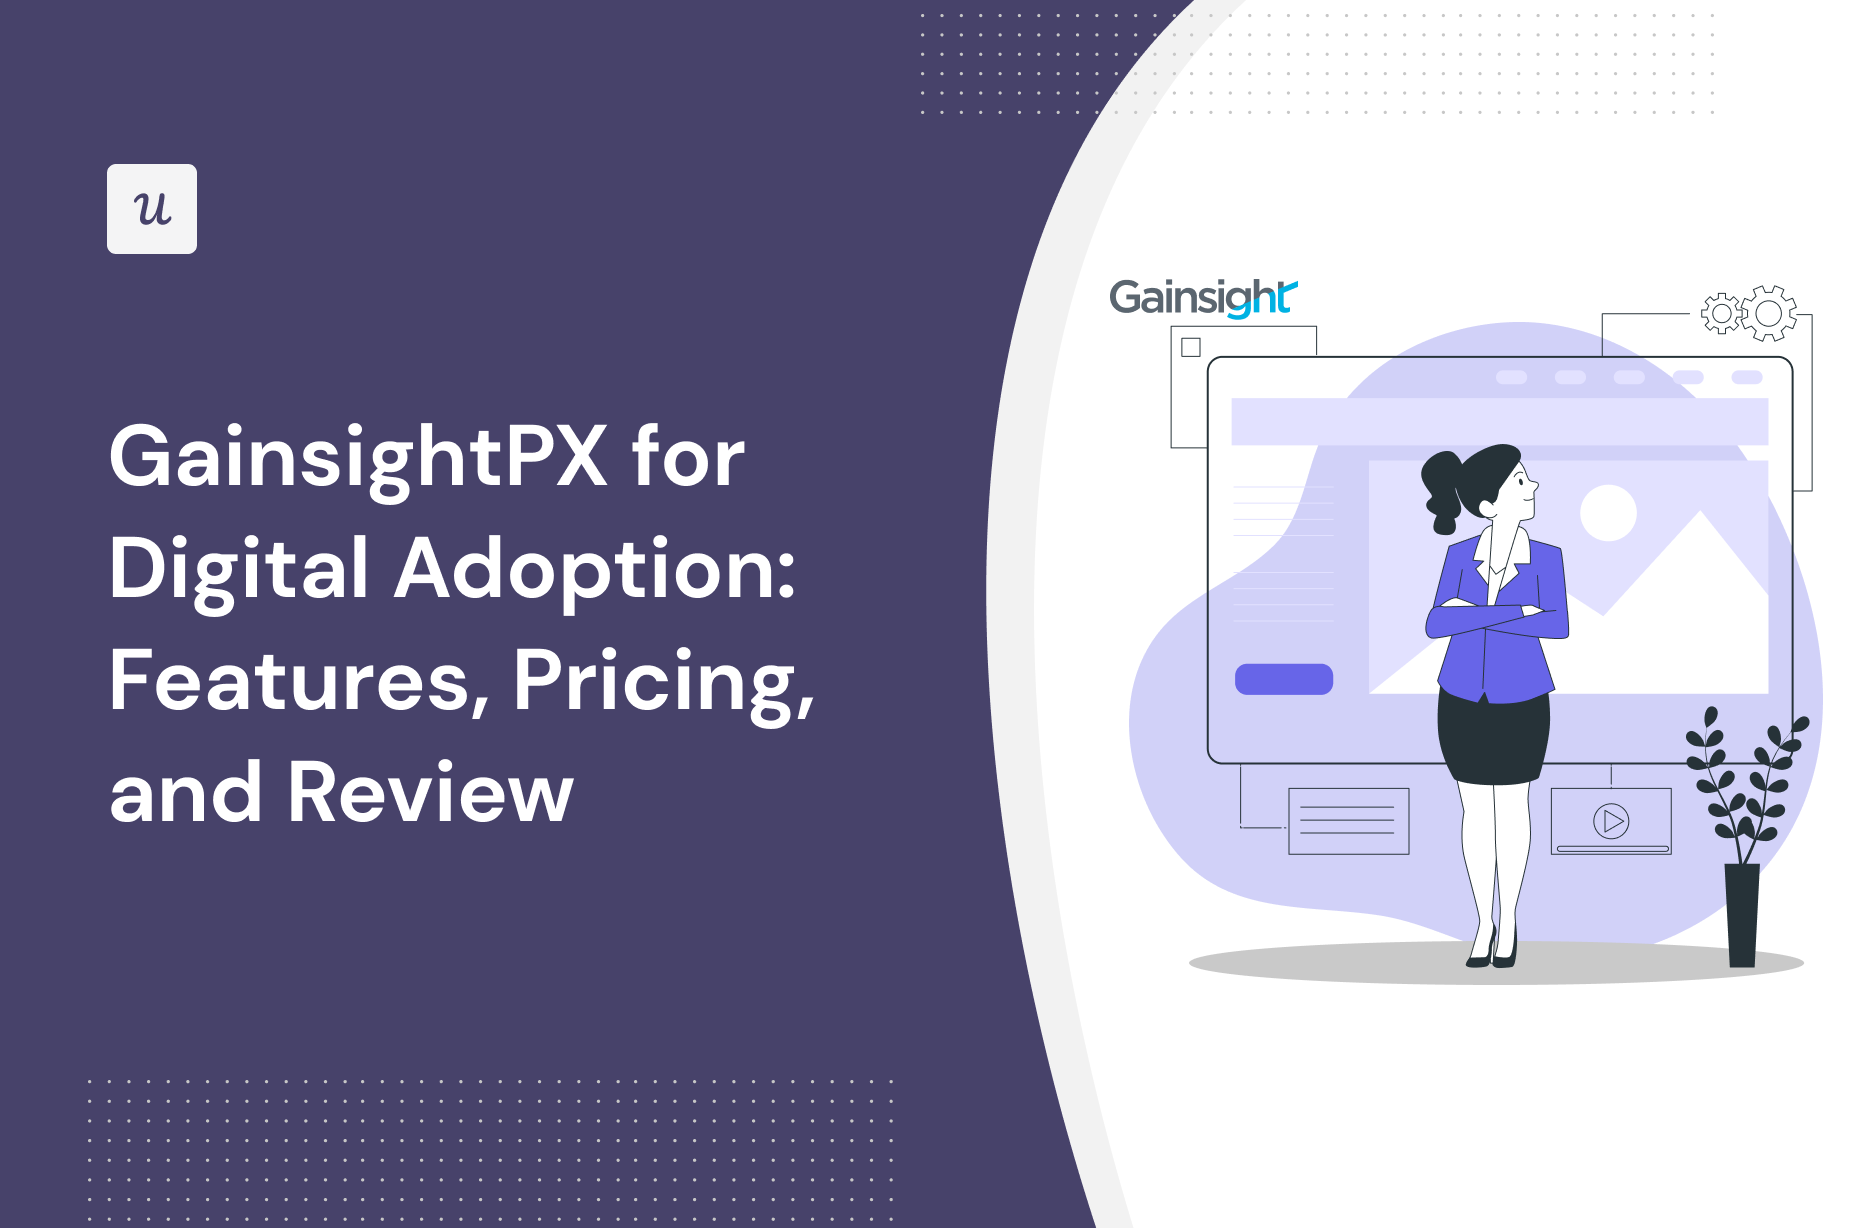 GainsightPX for Digital Adoption: Features, Pricing, and Review